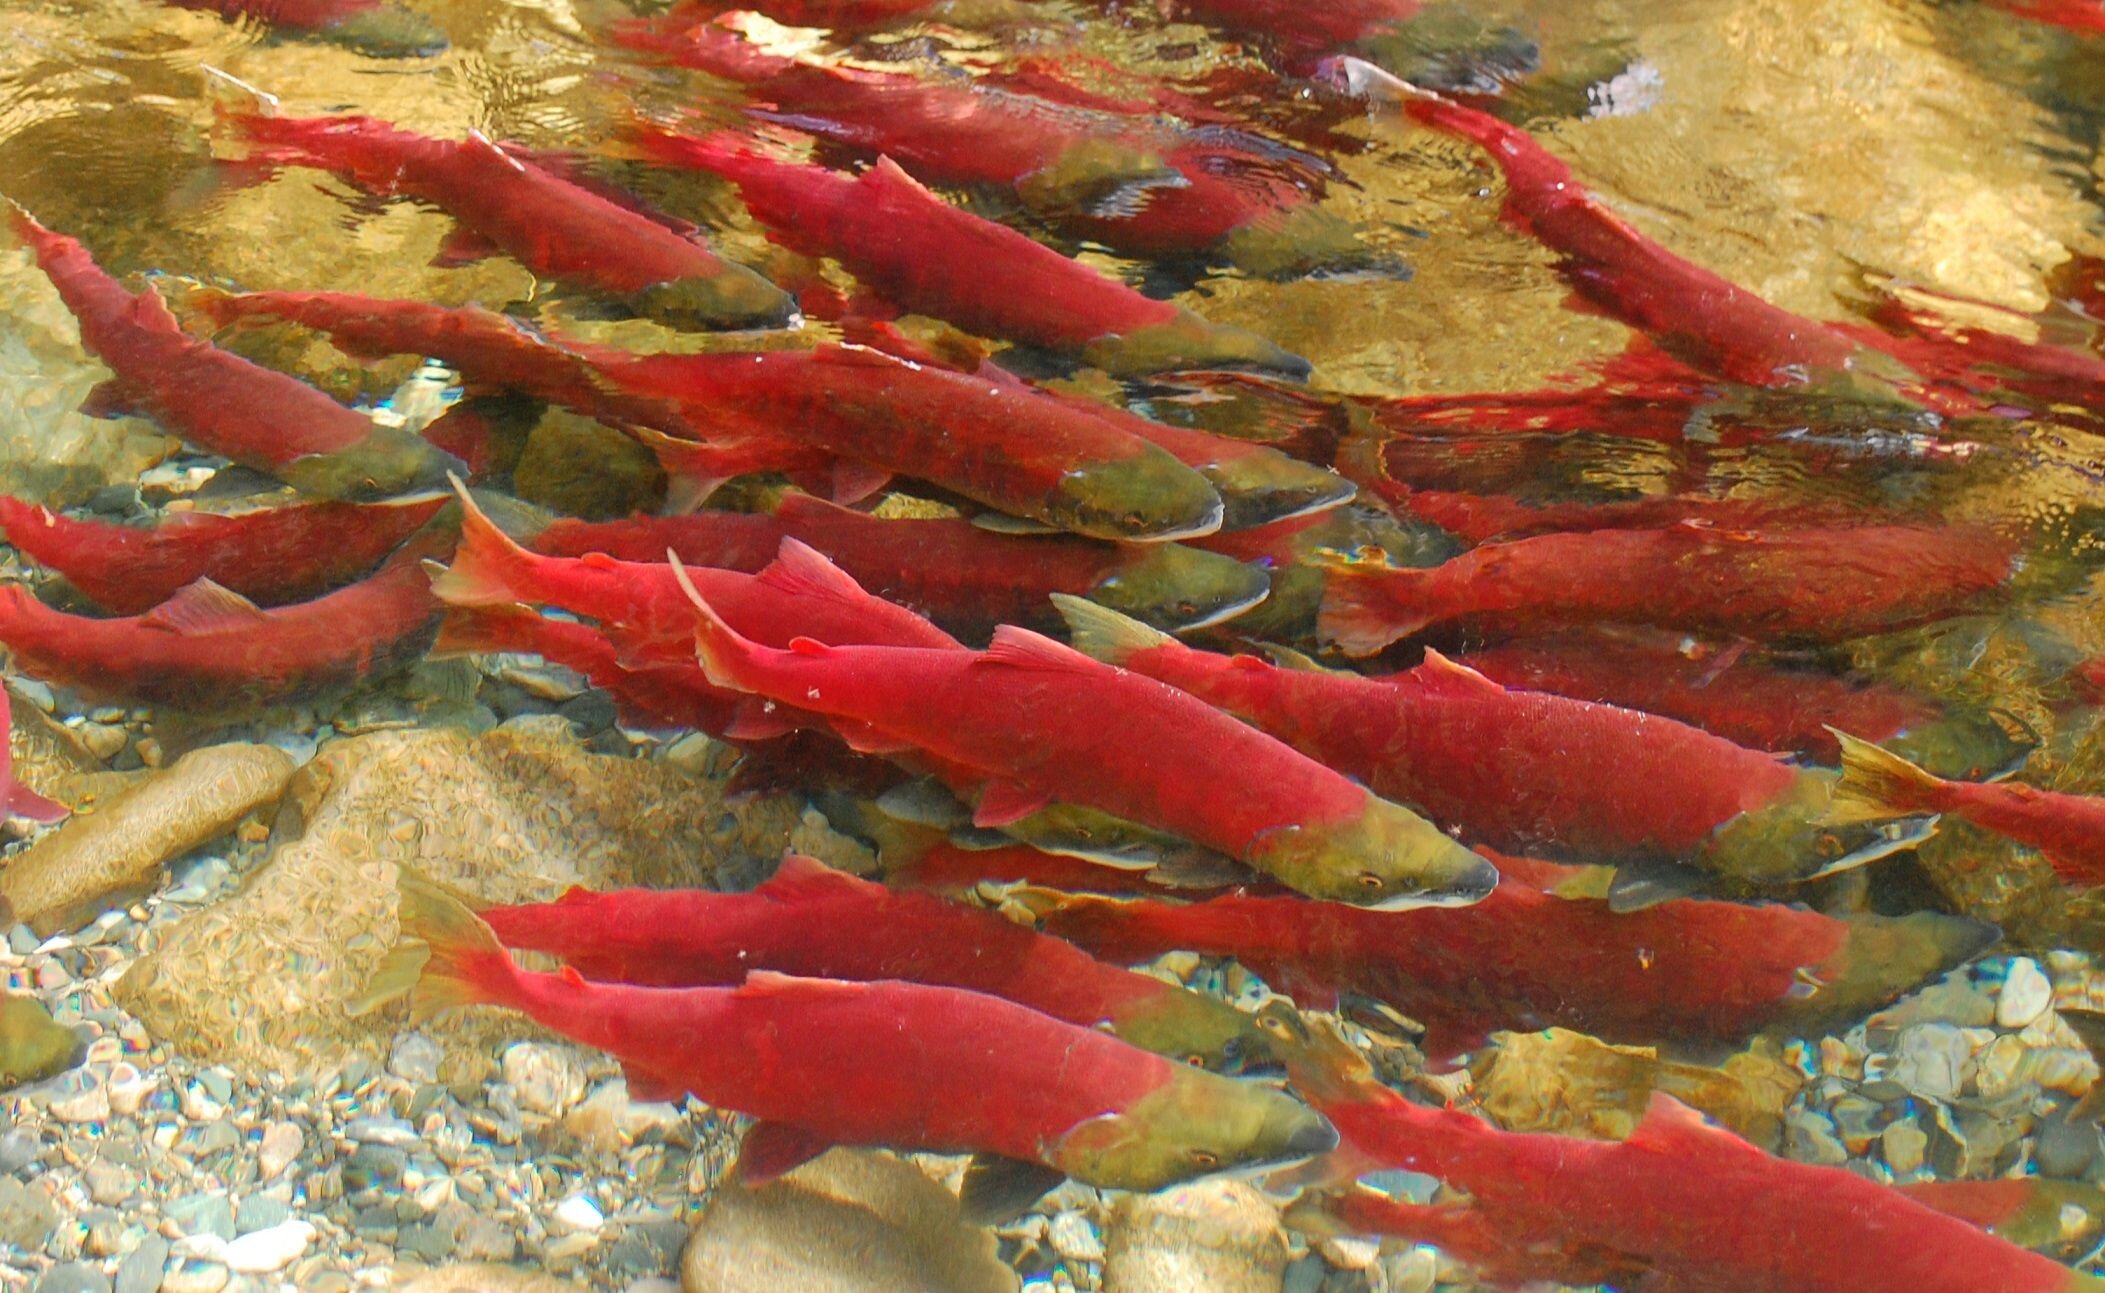 Physical fitness of wild Pacific sockeye salmon unaffected by